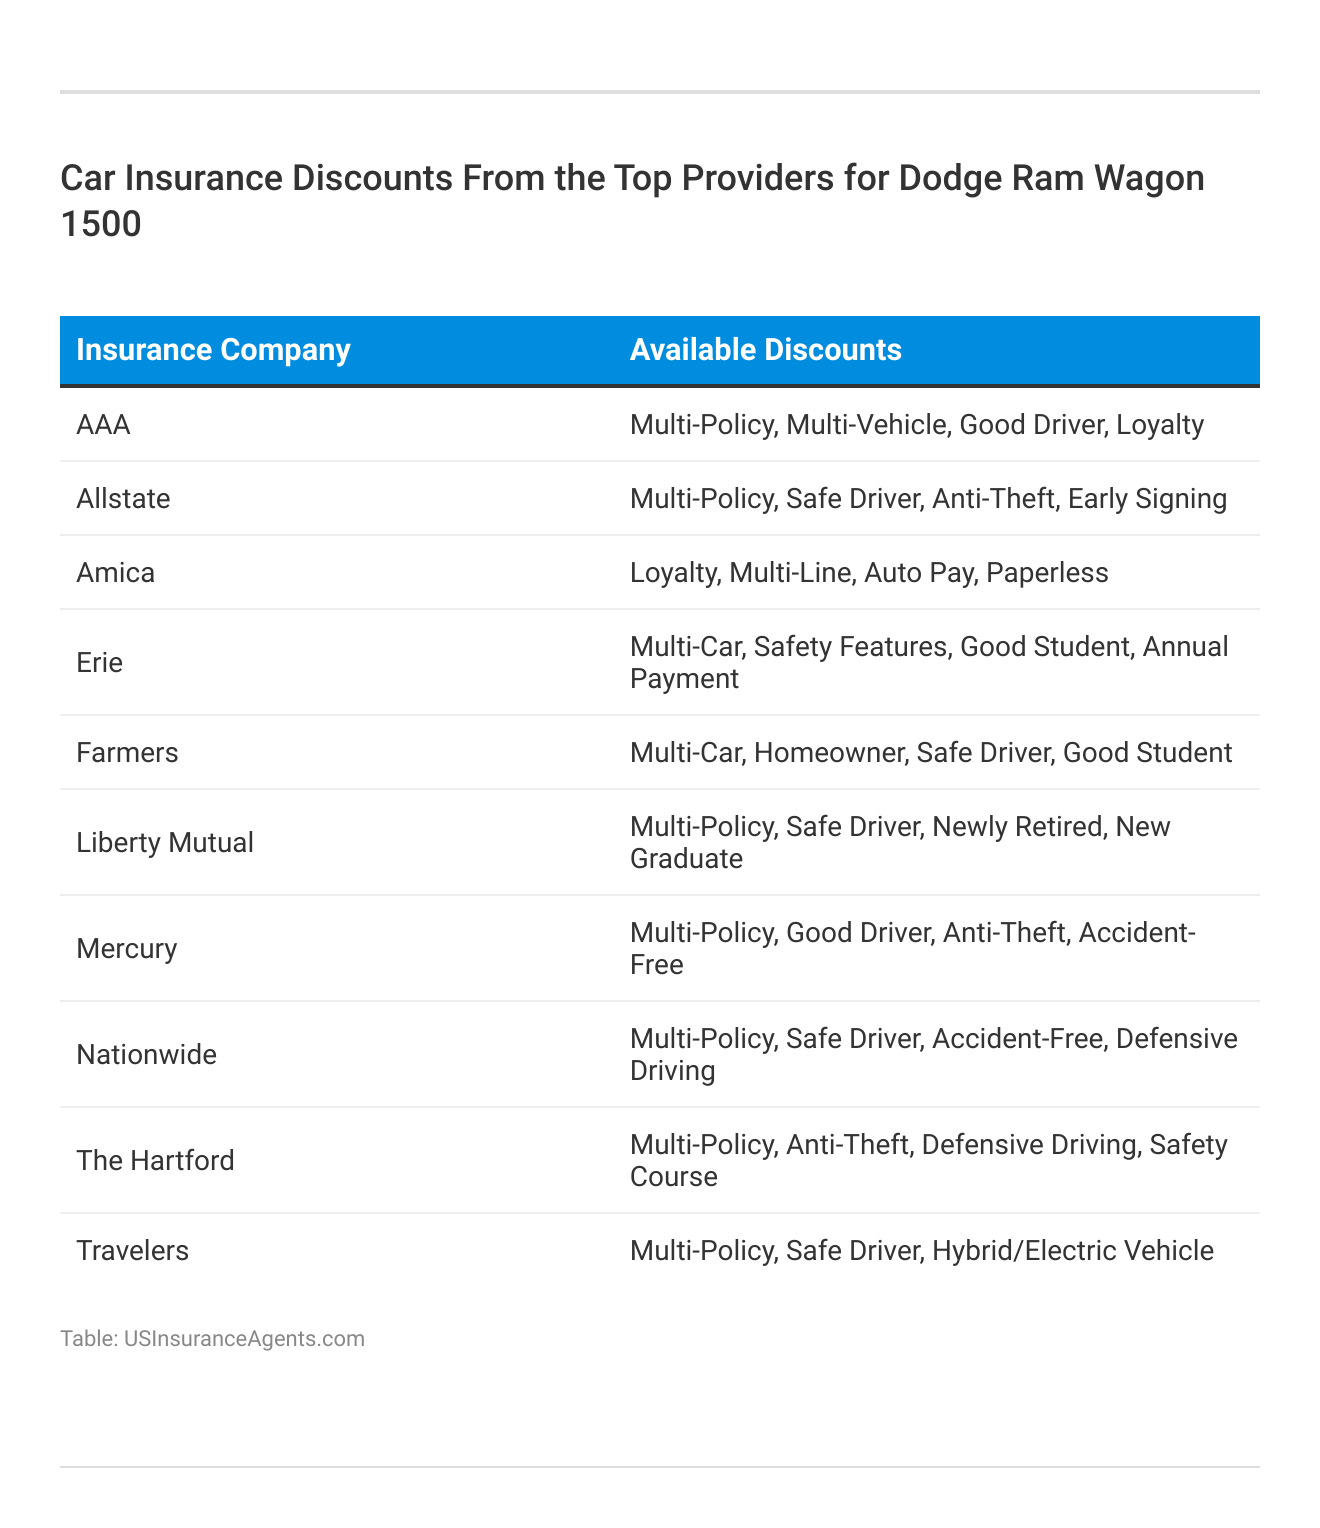 <h3>Car Insurance Discounts From the Top Providers for Dodge Ram Wagon 1500</h3>